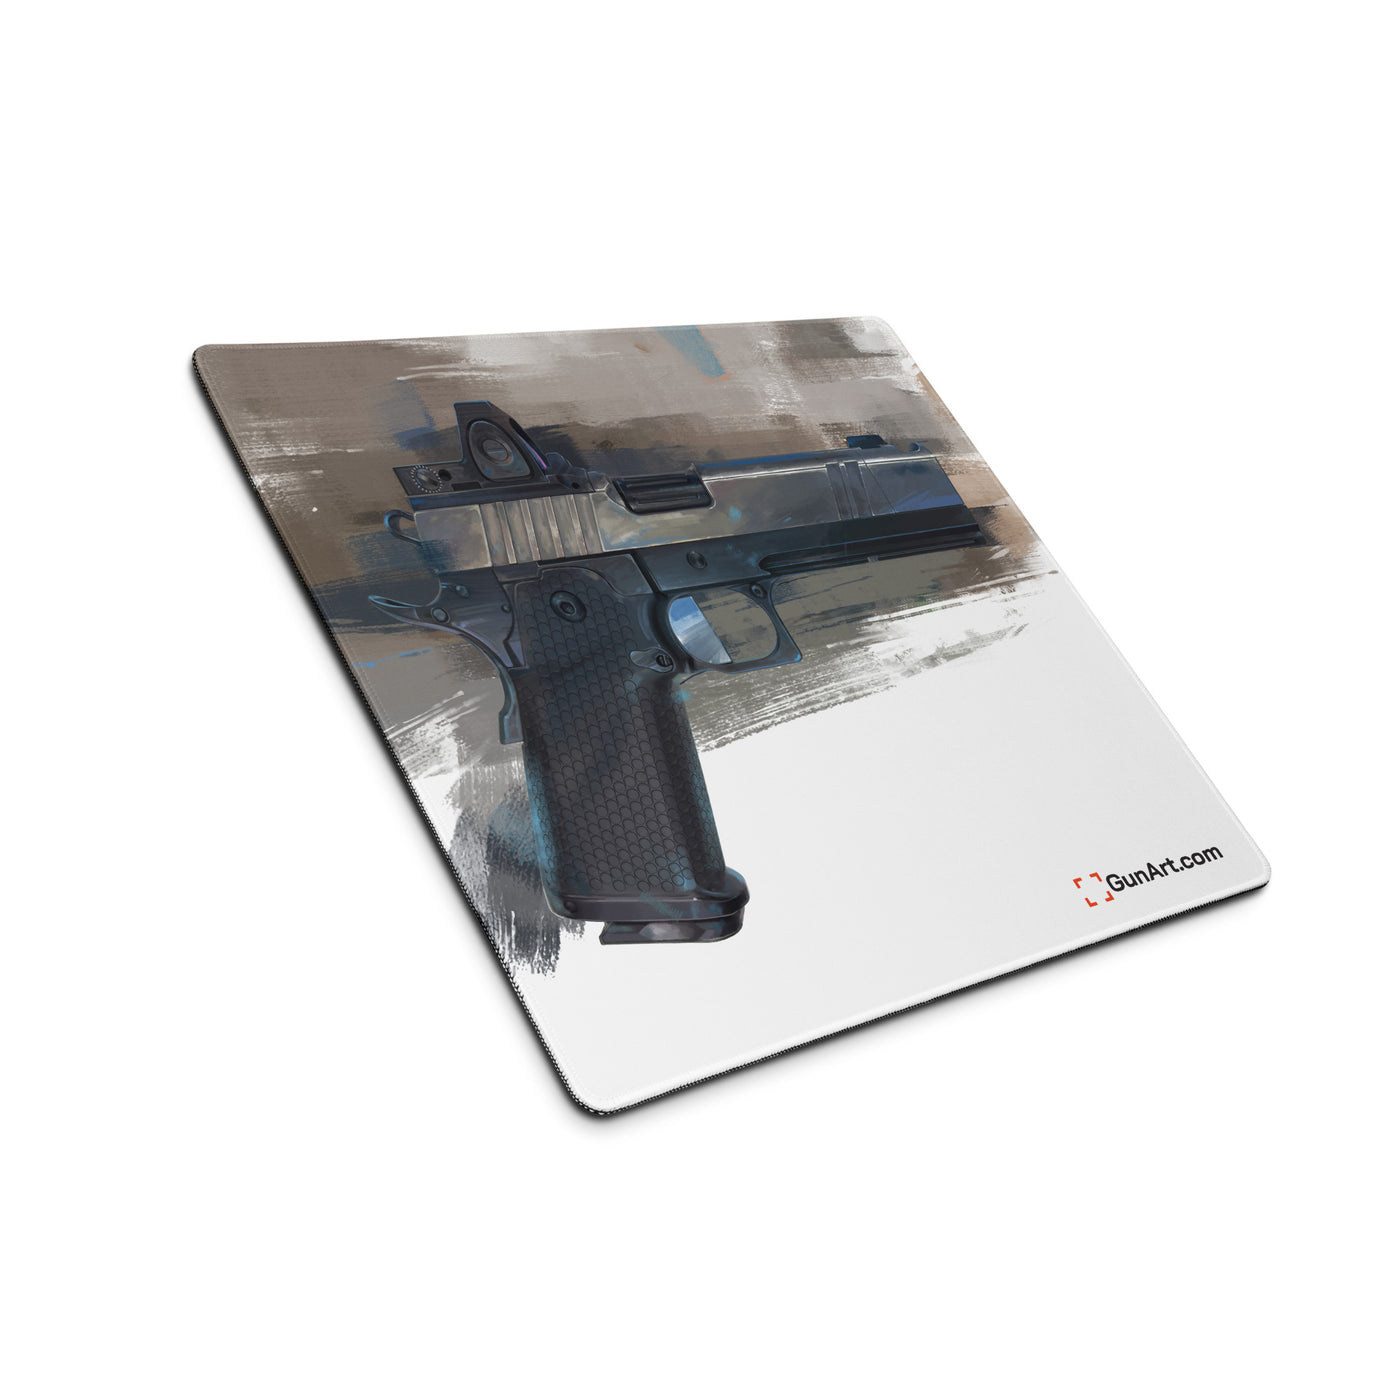 2011 Charlie Pistol Gaming Mouse Pad - Brown Background